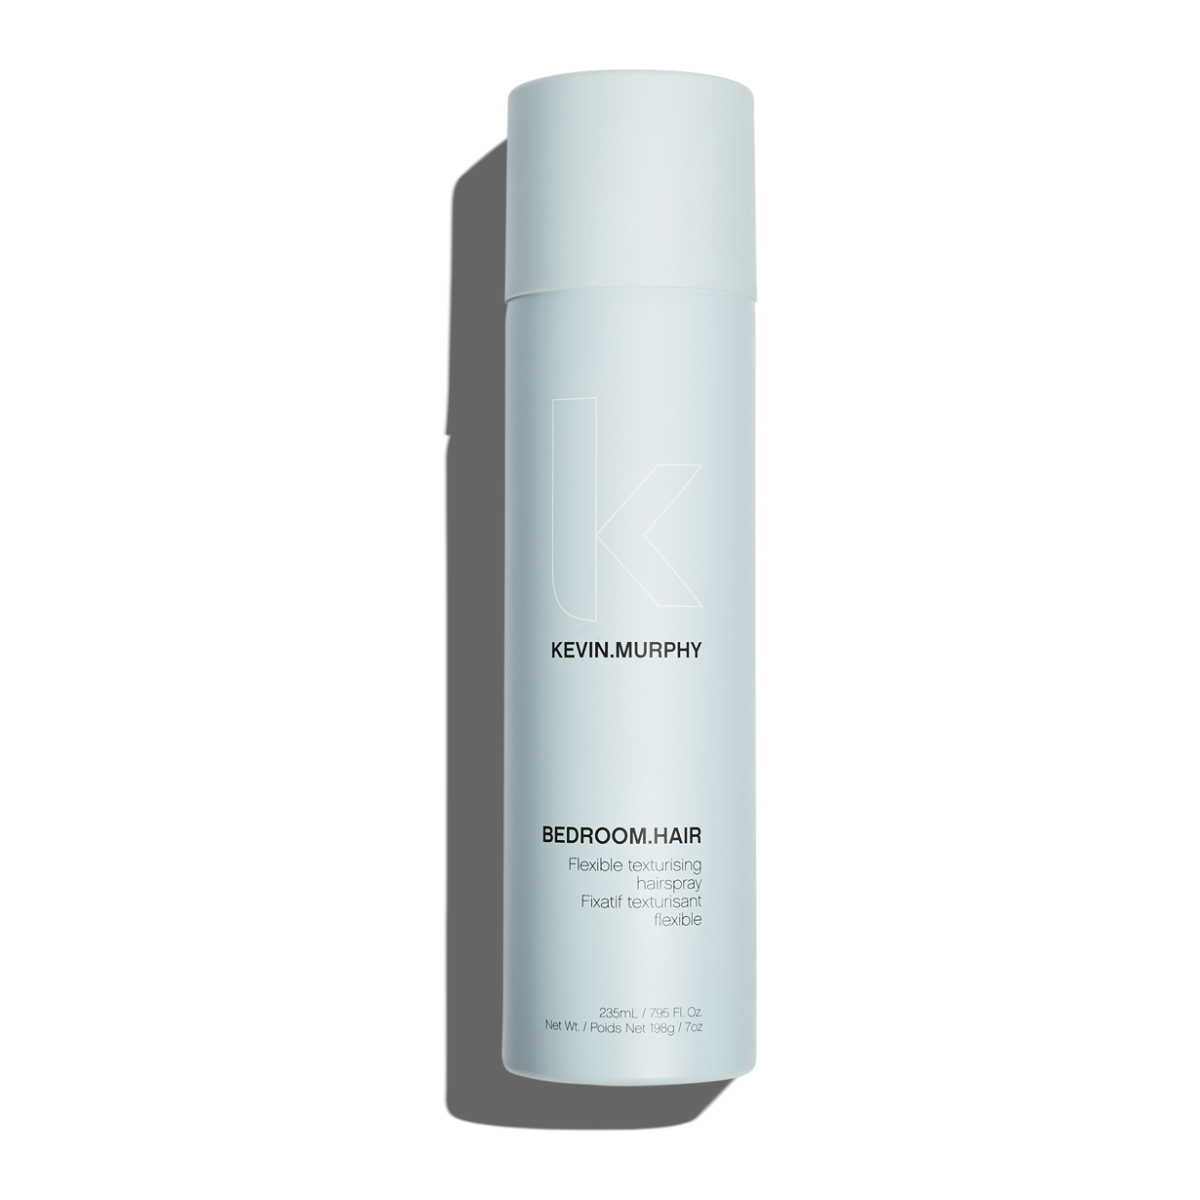 KEVIN MURPHY - BEDROOM.HAIR (250ml) Lacca flessibile